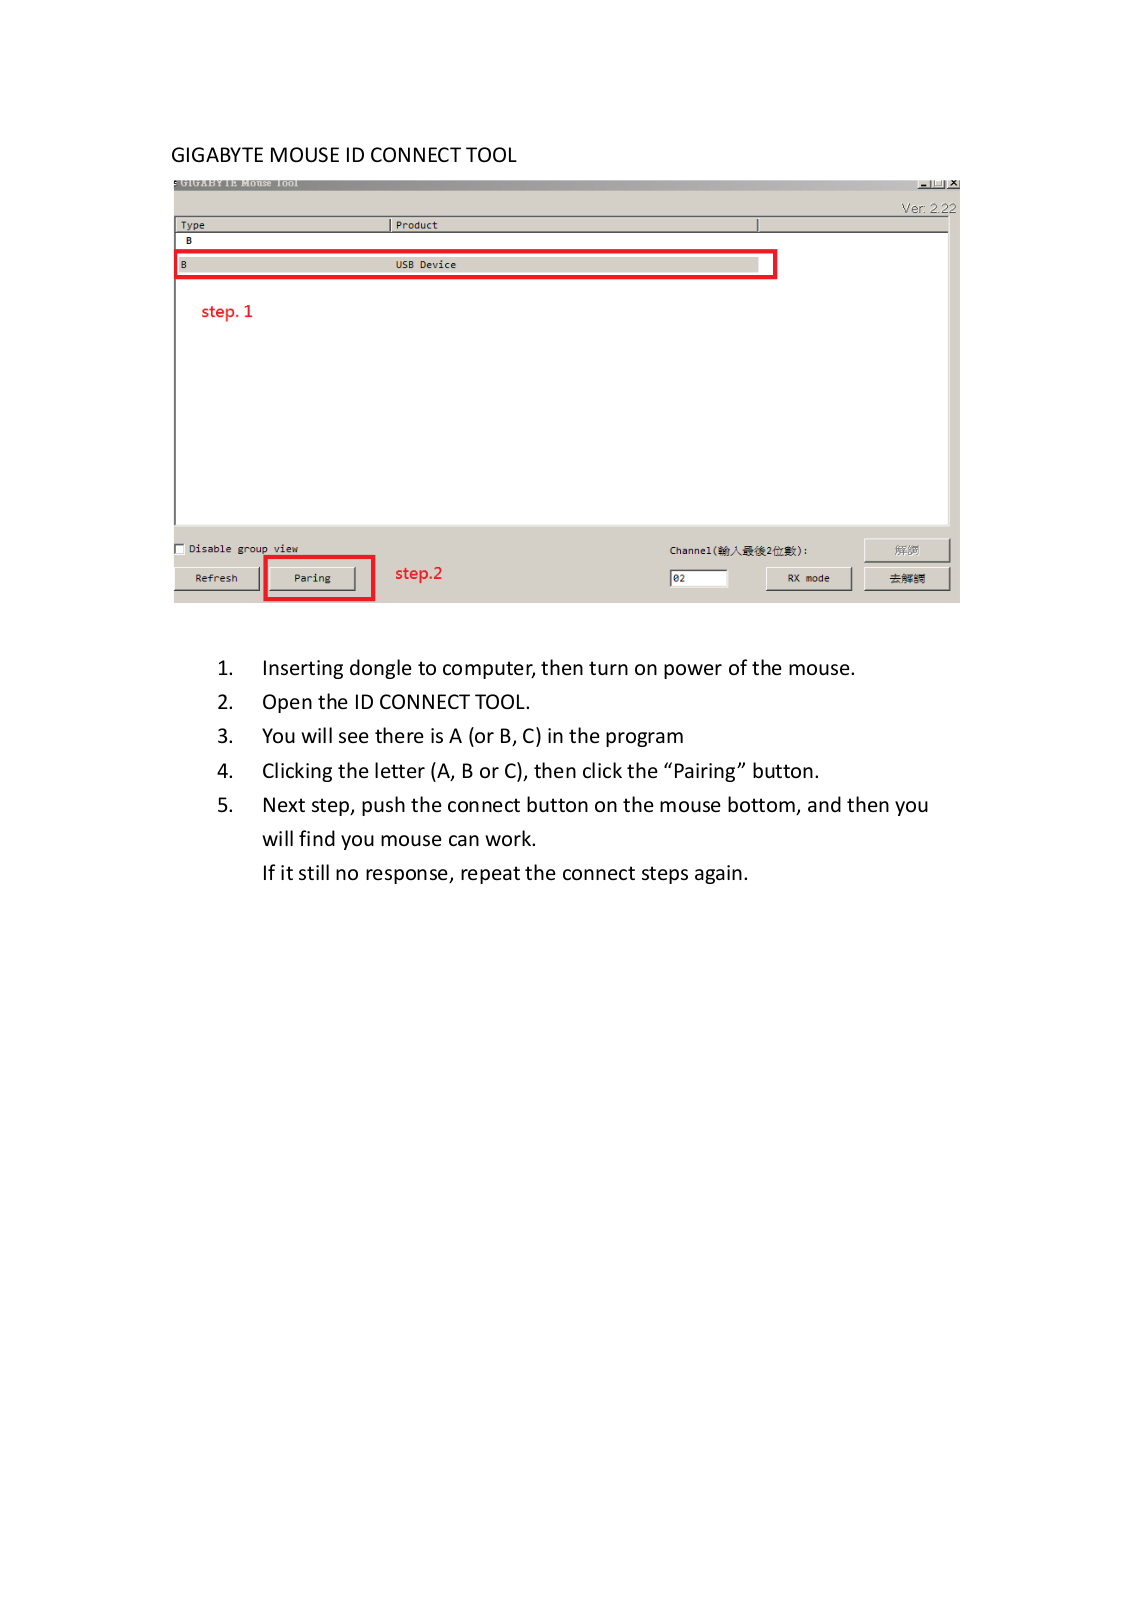 Gigabyte MOUSE ID CONNECT TOOL Service Manual